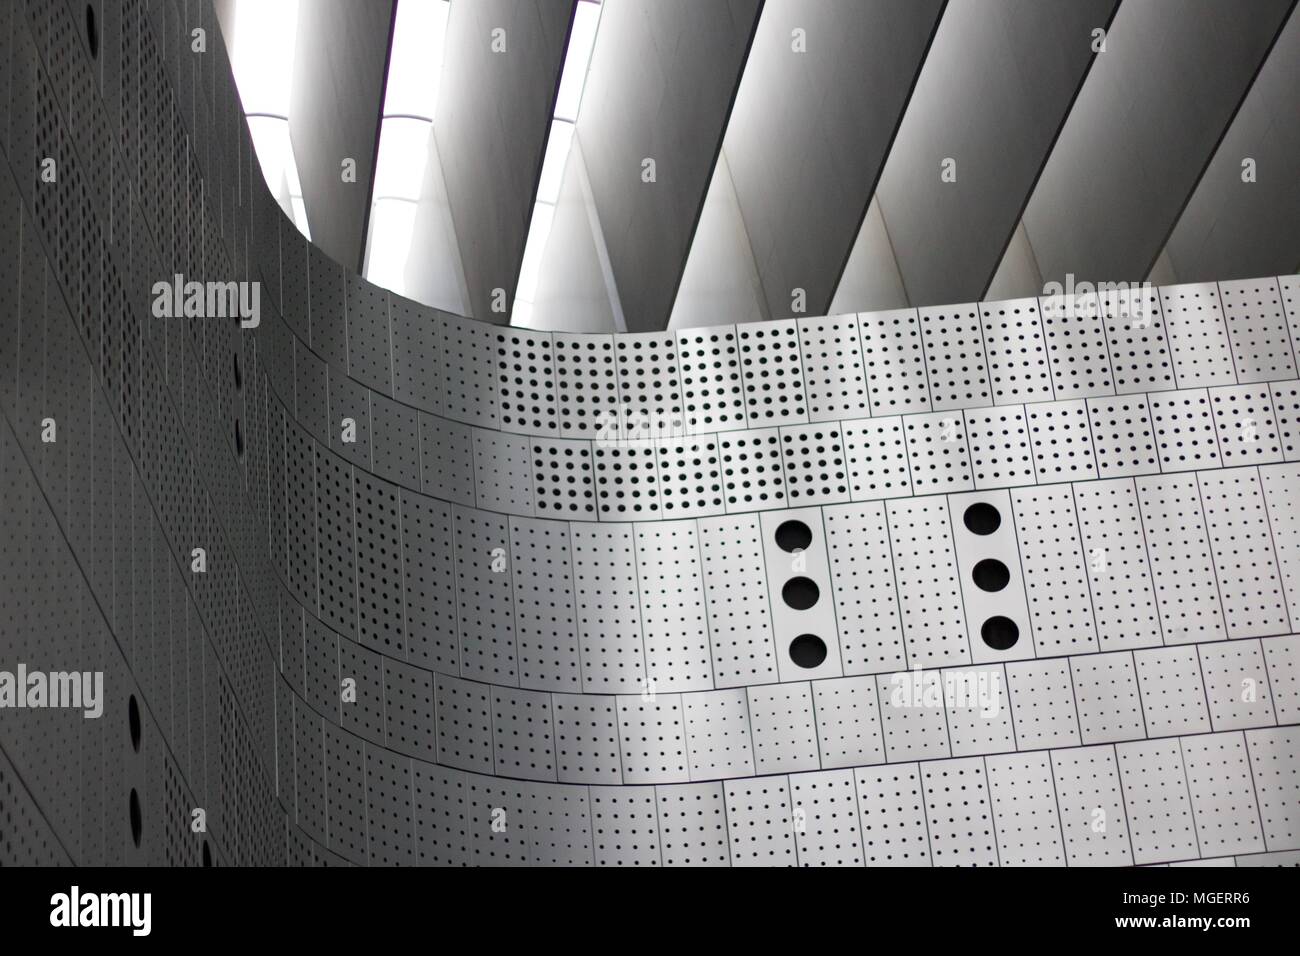 Photograph of a wall made of perforated metal panels with holes of different sizes Stock Photo